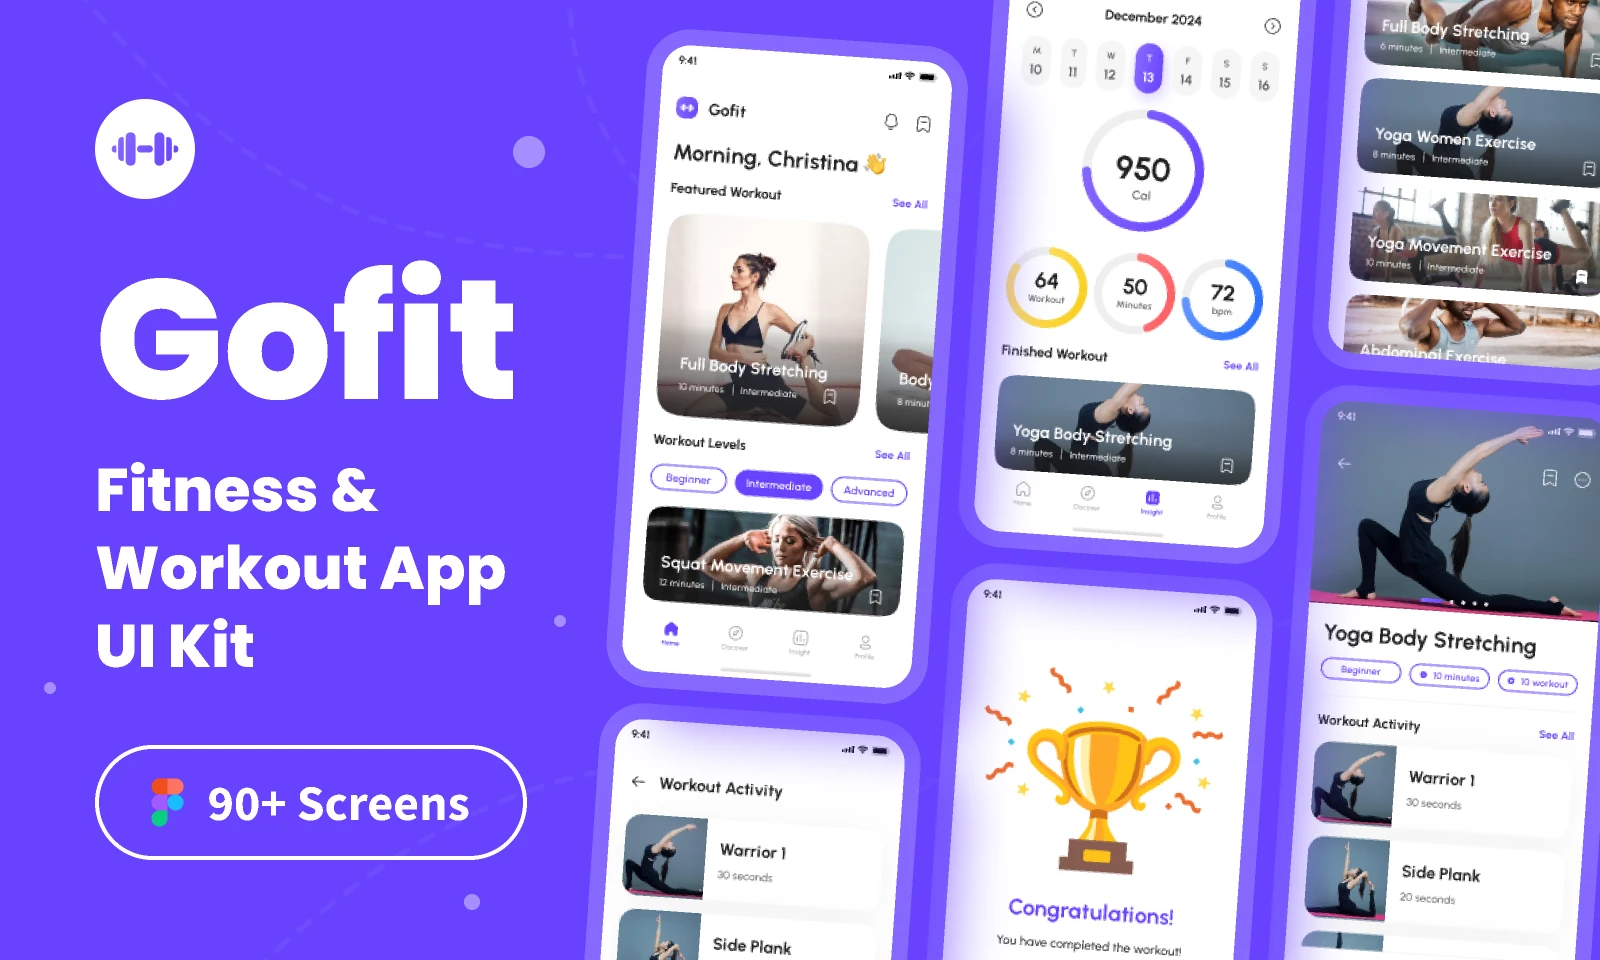 Gofit - Fitness & Workout App UI Kit for Figma and Adobe XD